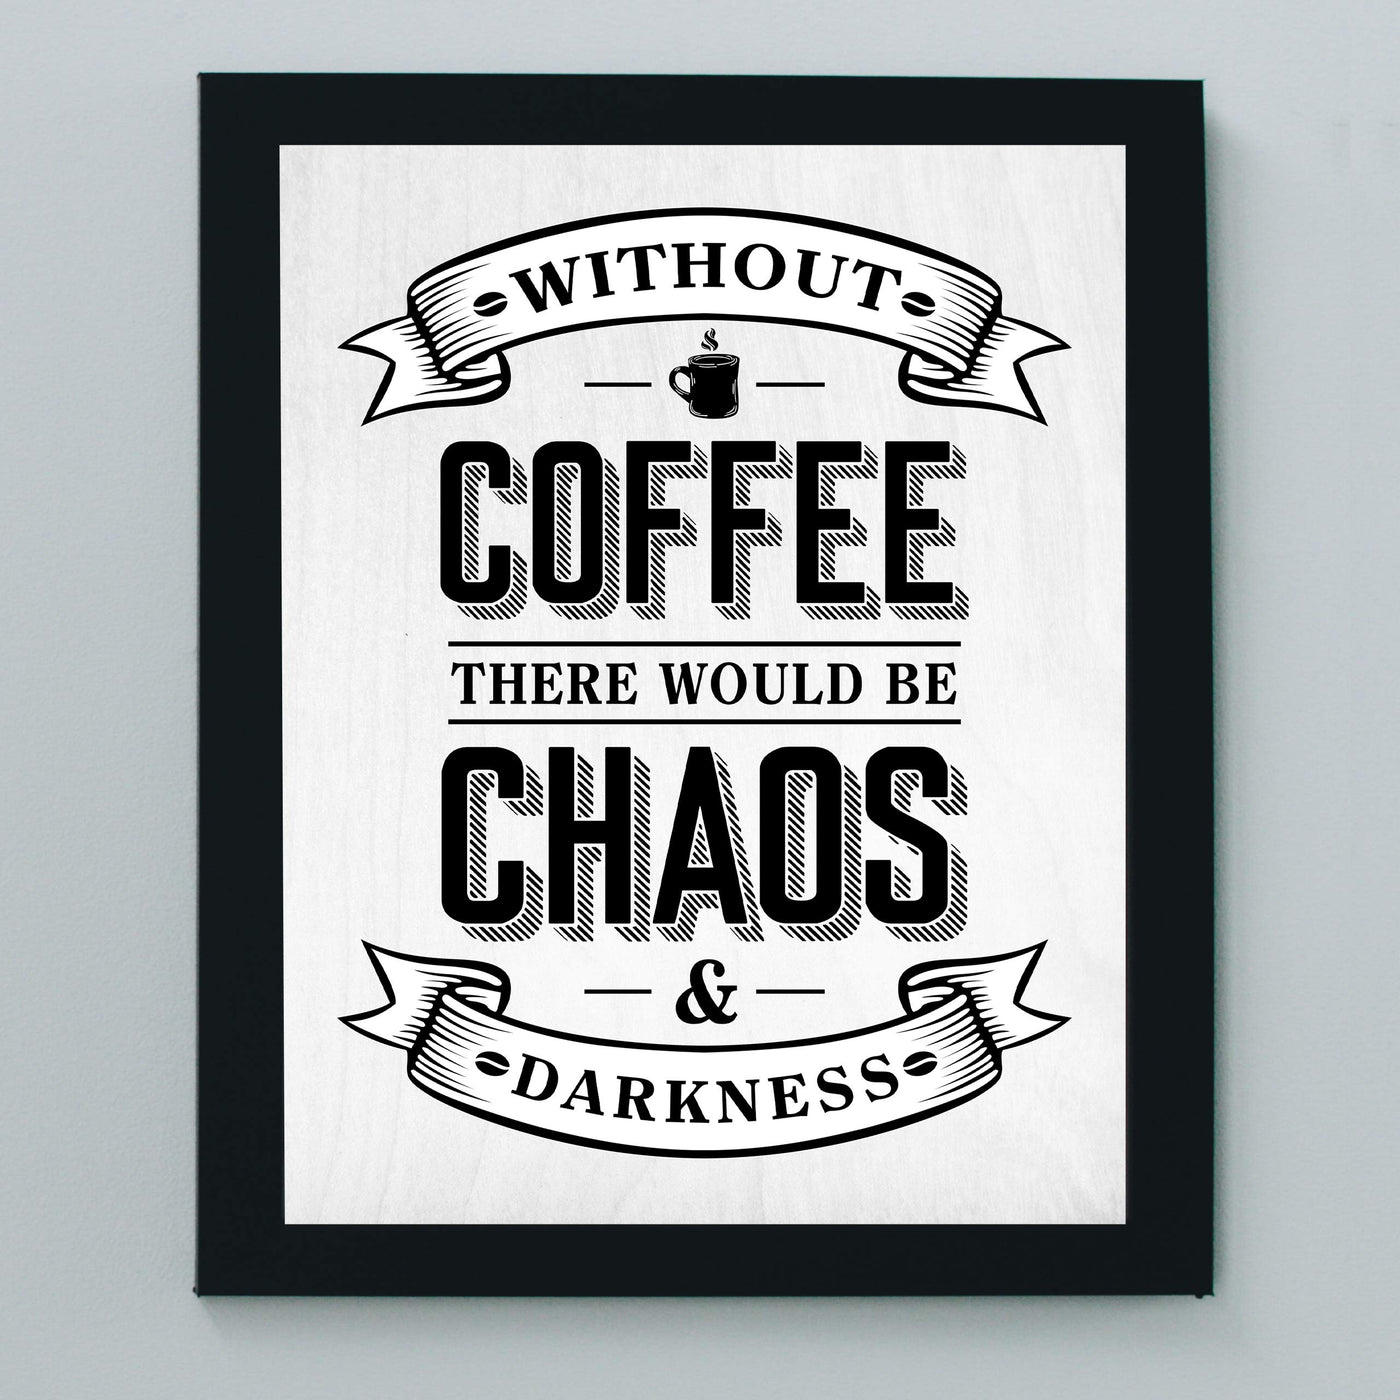 Without Coffee There Would Be Chaos & Darkness Funny Coffee Sign-8 x 10" Typographic Wall Art Print-Ready to Frame. Humorous Home-Kitchen-Office-Restaurant-Cafe Decor. Fun Gift for Coffee Lovers!